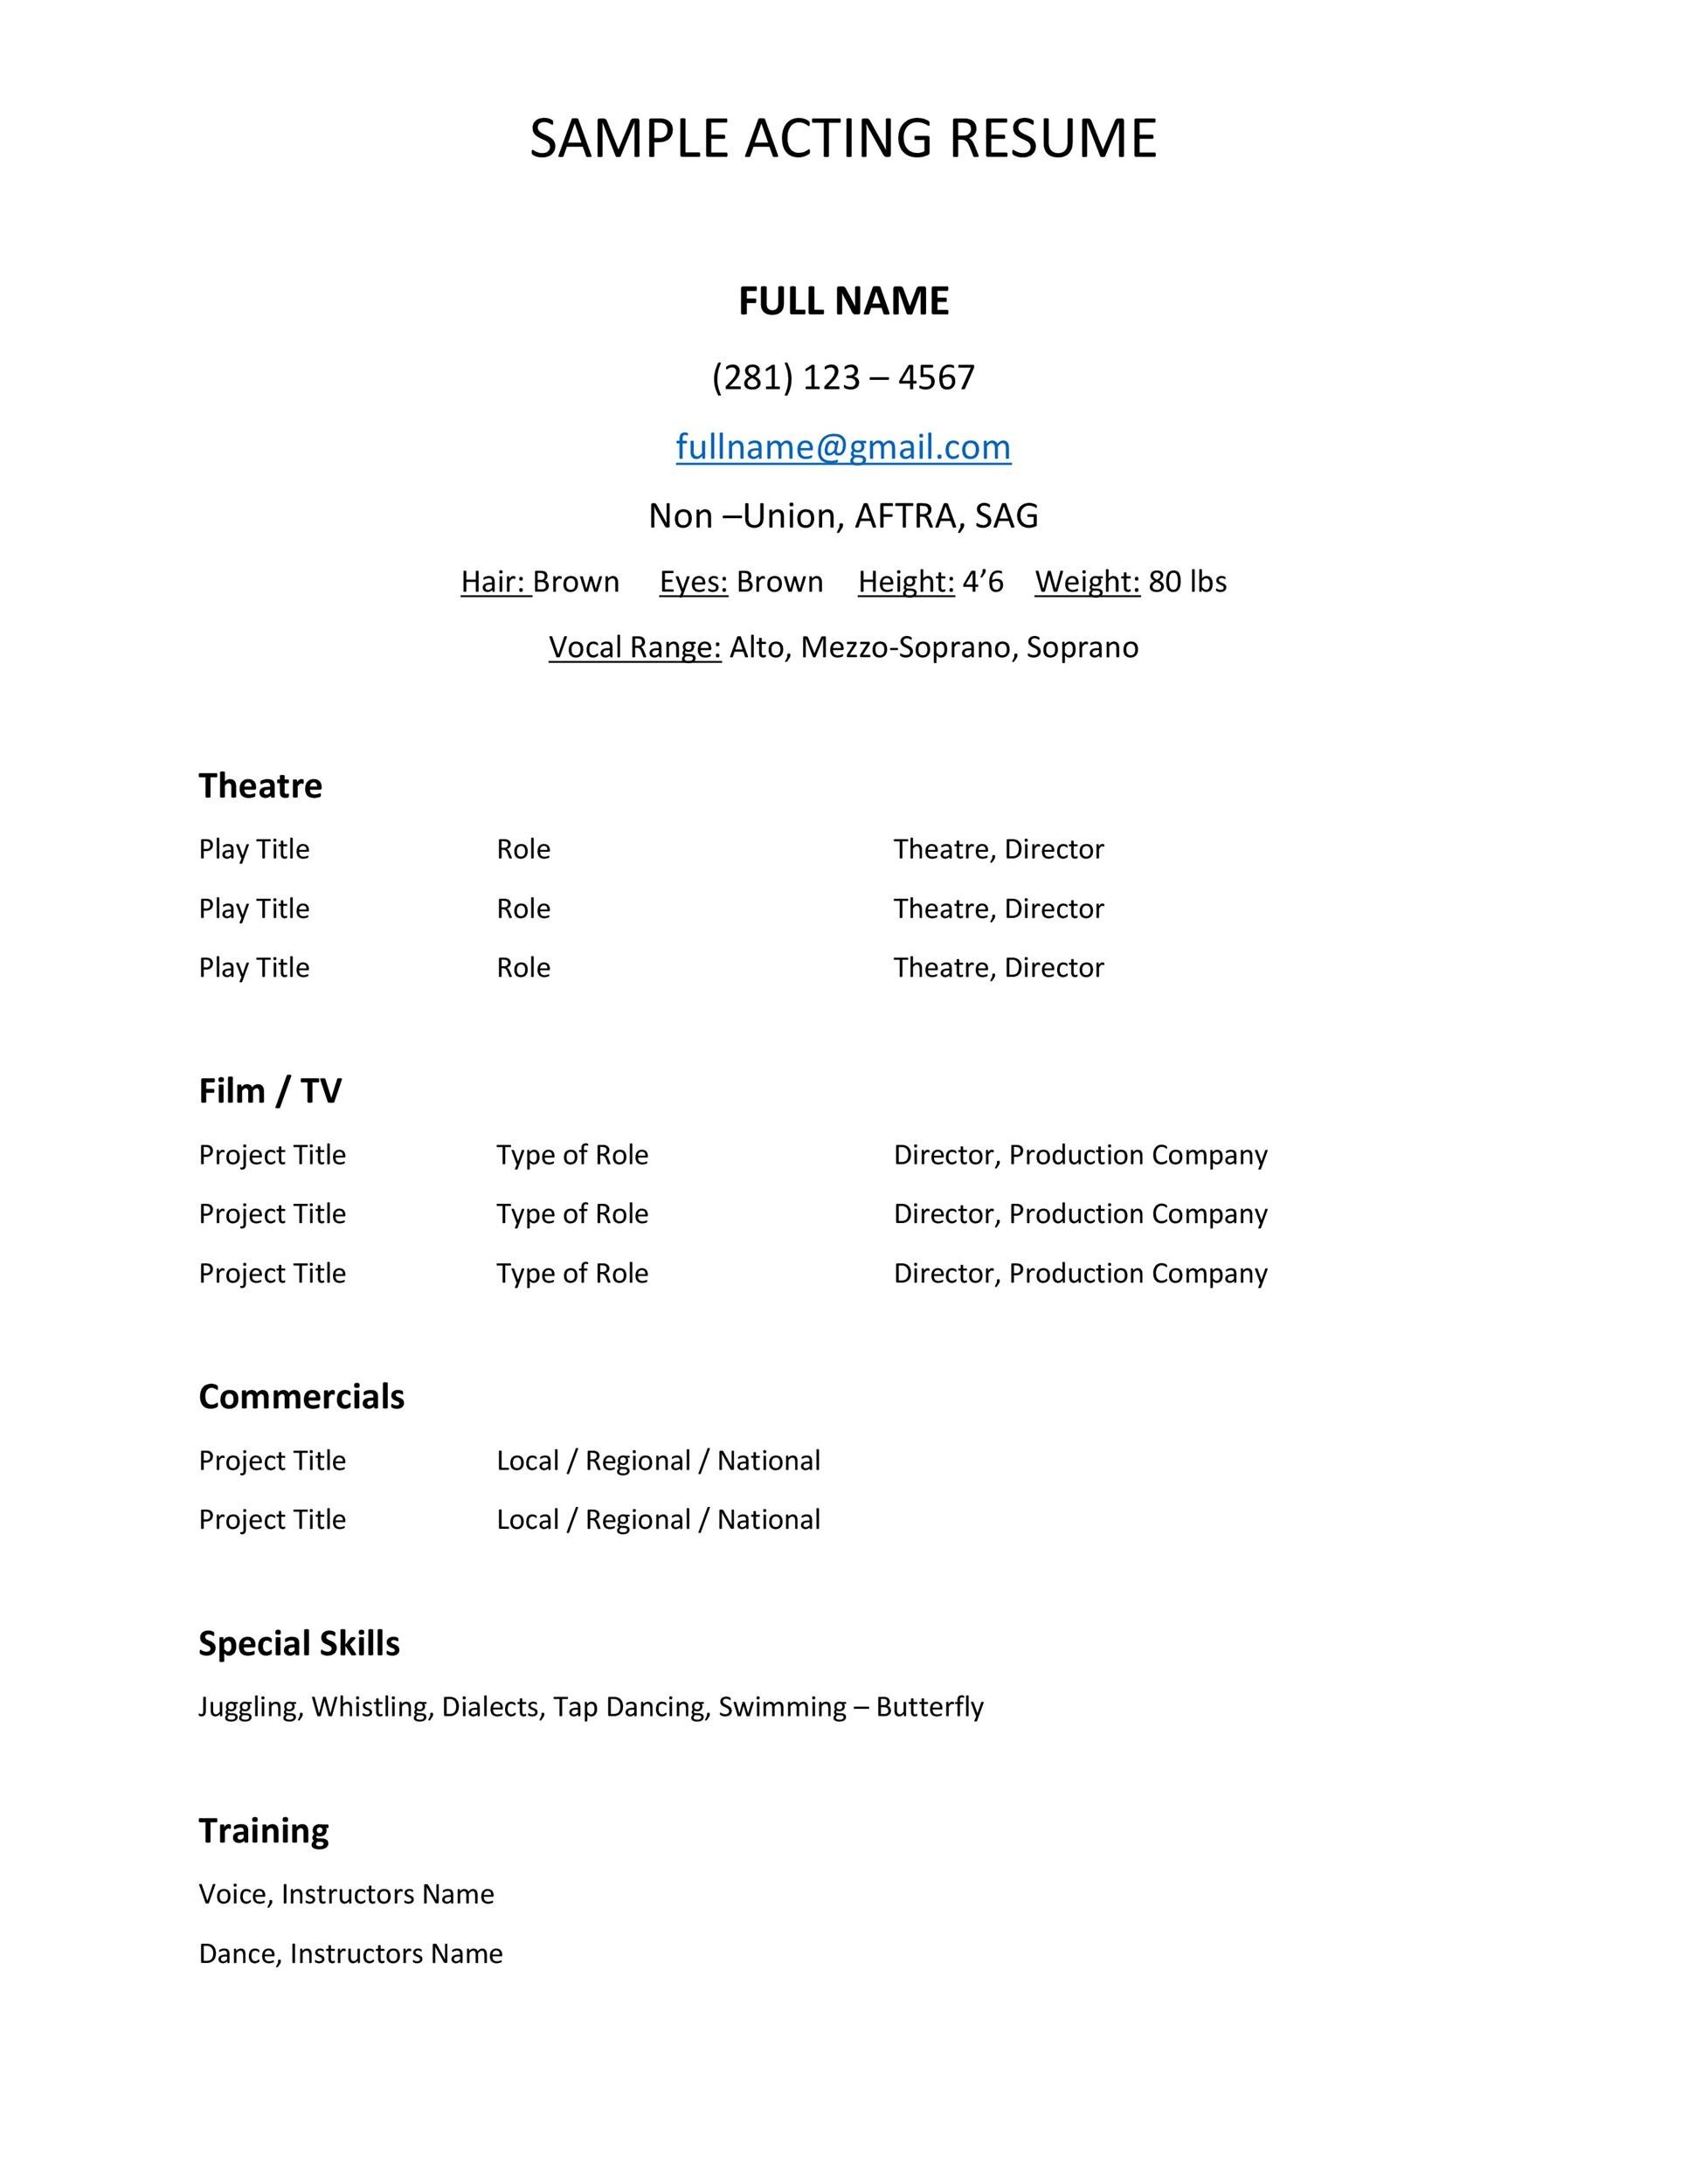 Free acting resume template 08